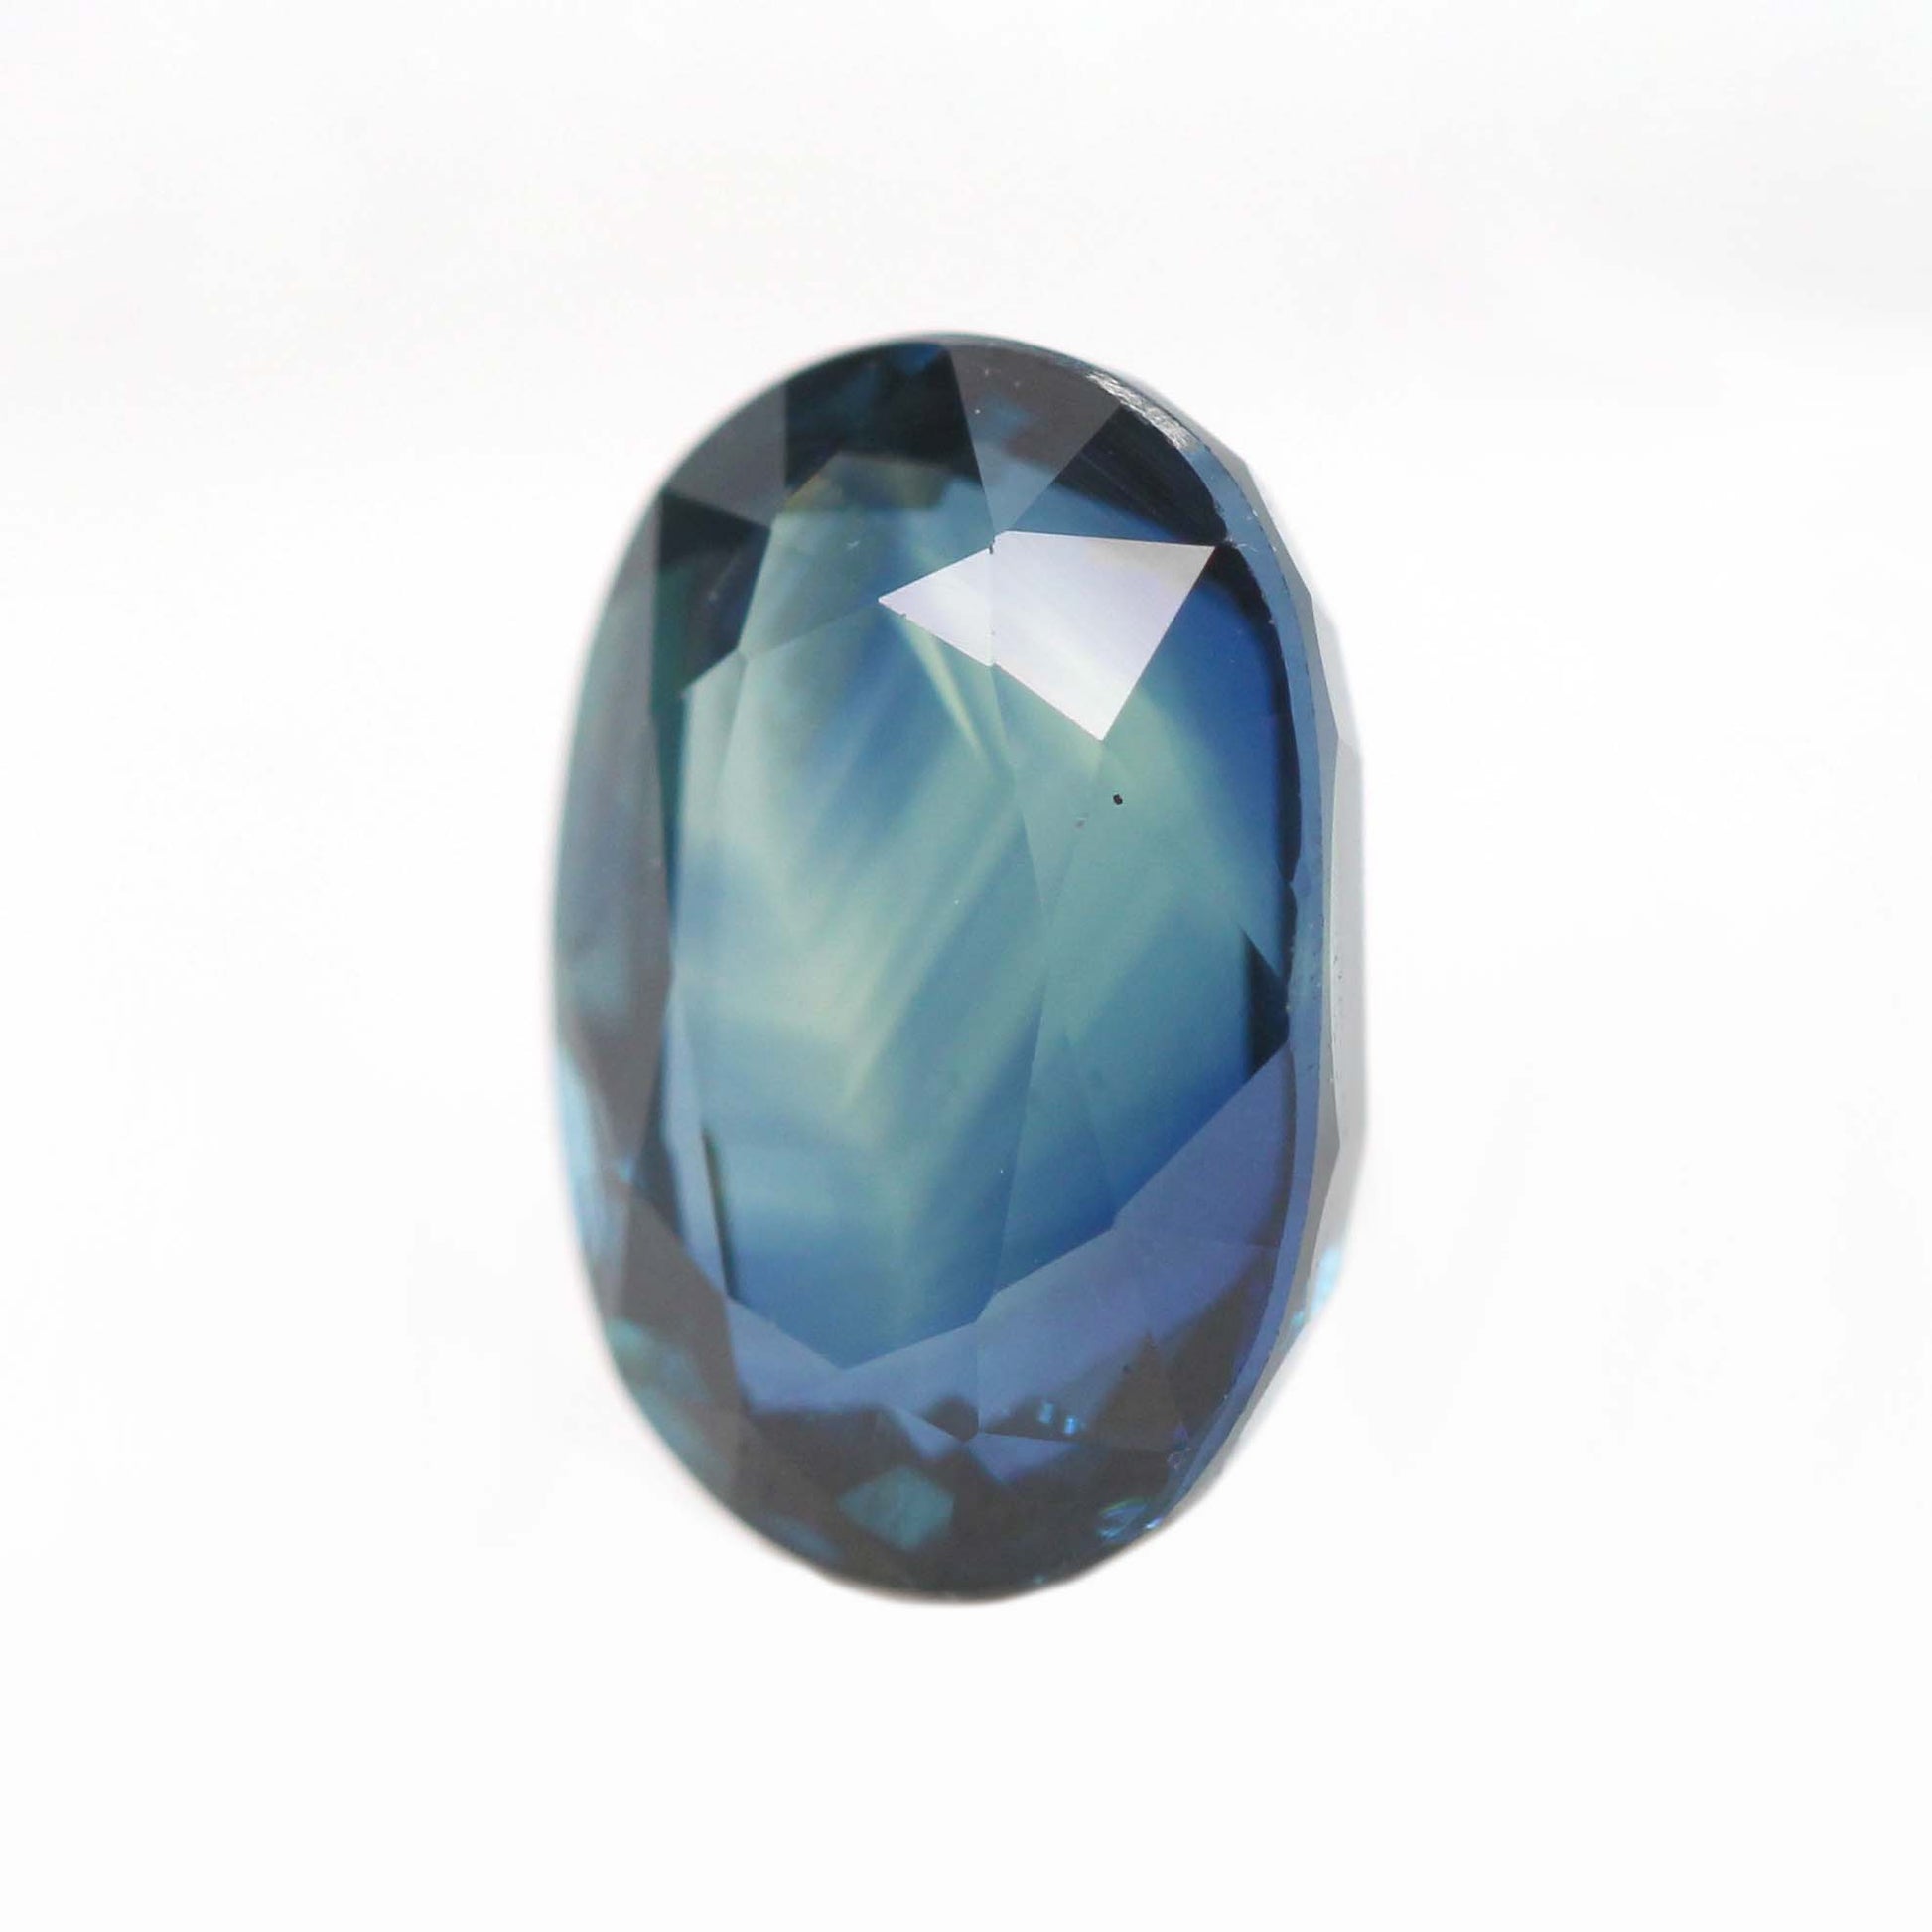 2.73 Carat Teal Blue Oval Sapphire for Custom Work - Inventory Code TBOS273 - Midwinter Co. Alternative Bridal Rings and Modern Fine Jewelry